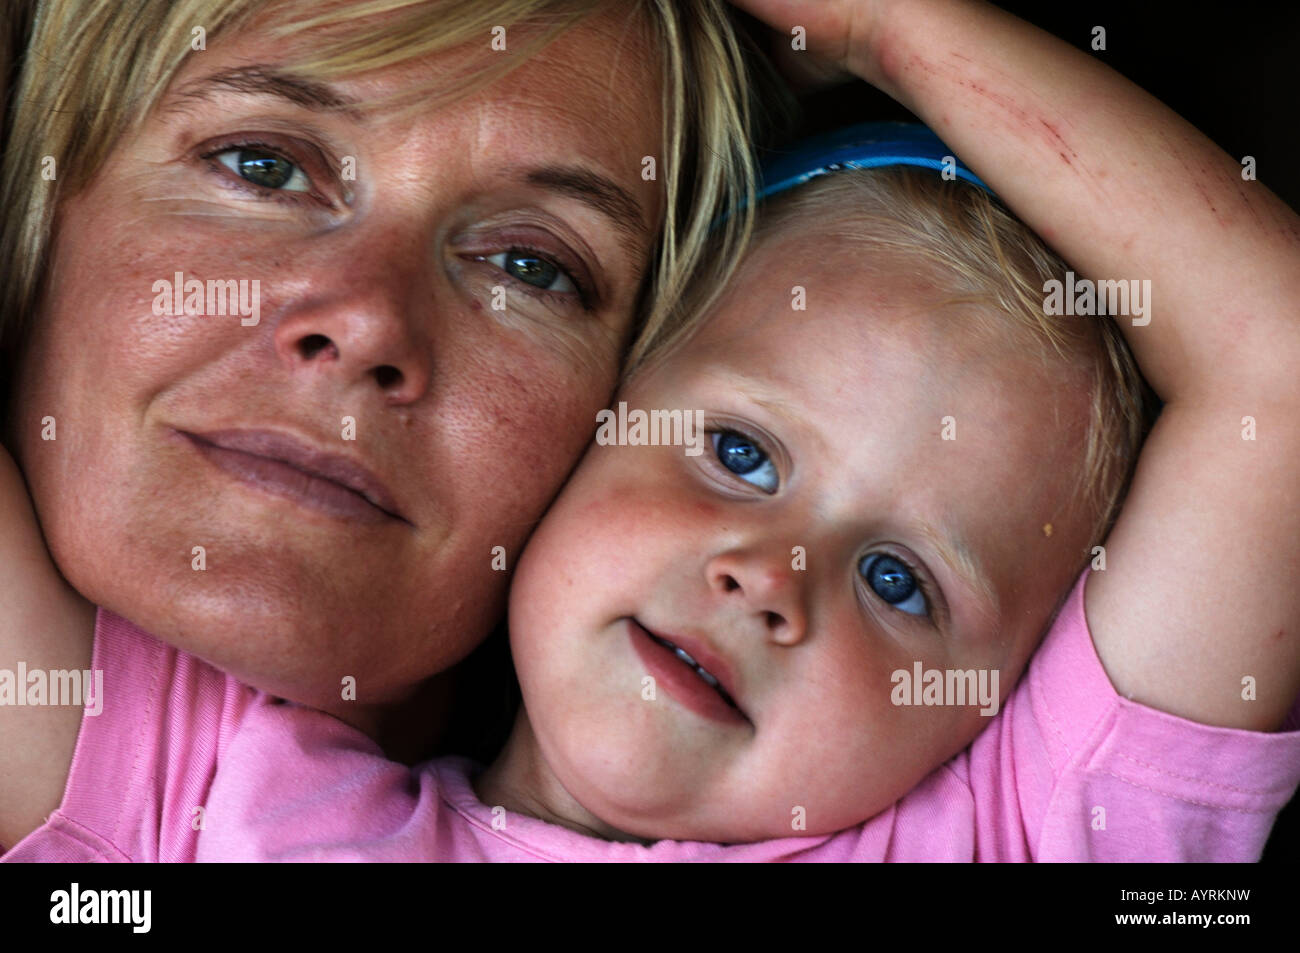 Three year old girl and her mother Stock Photo